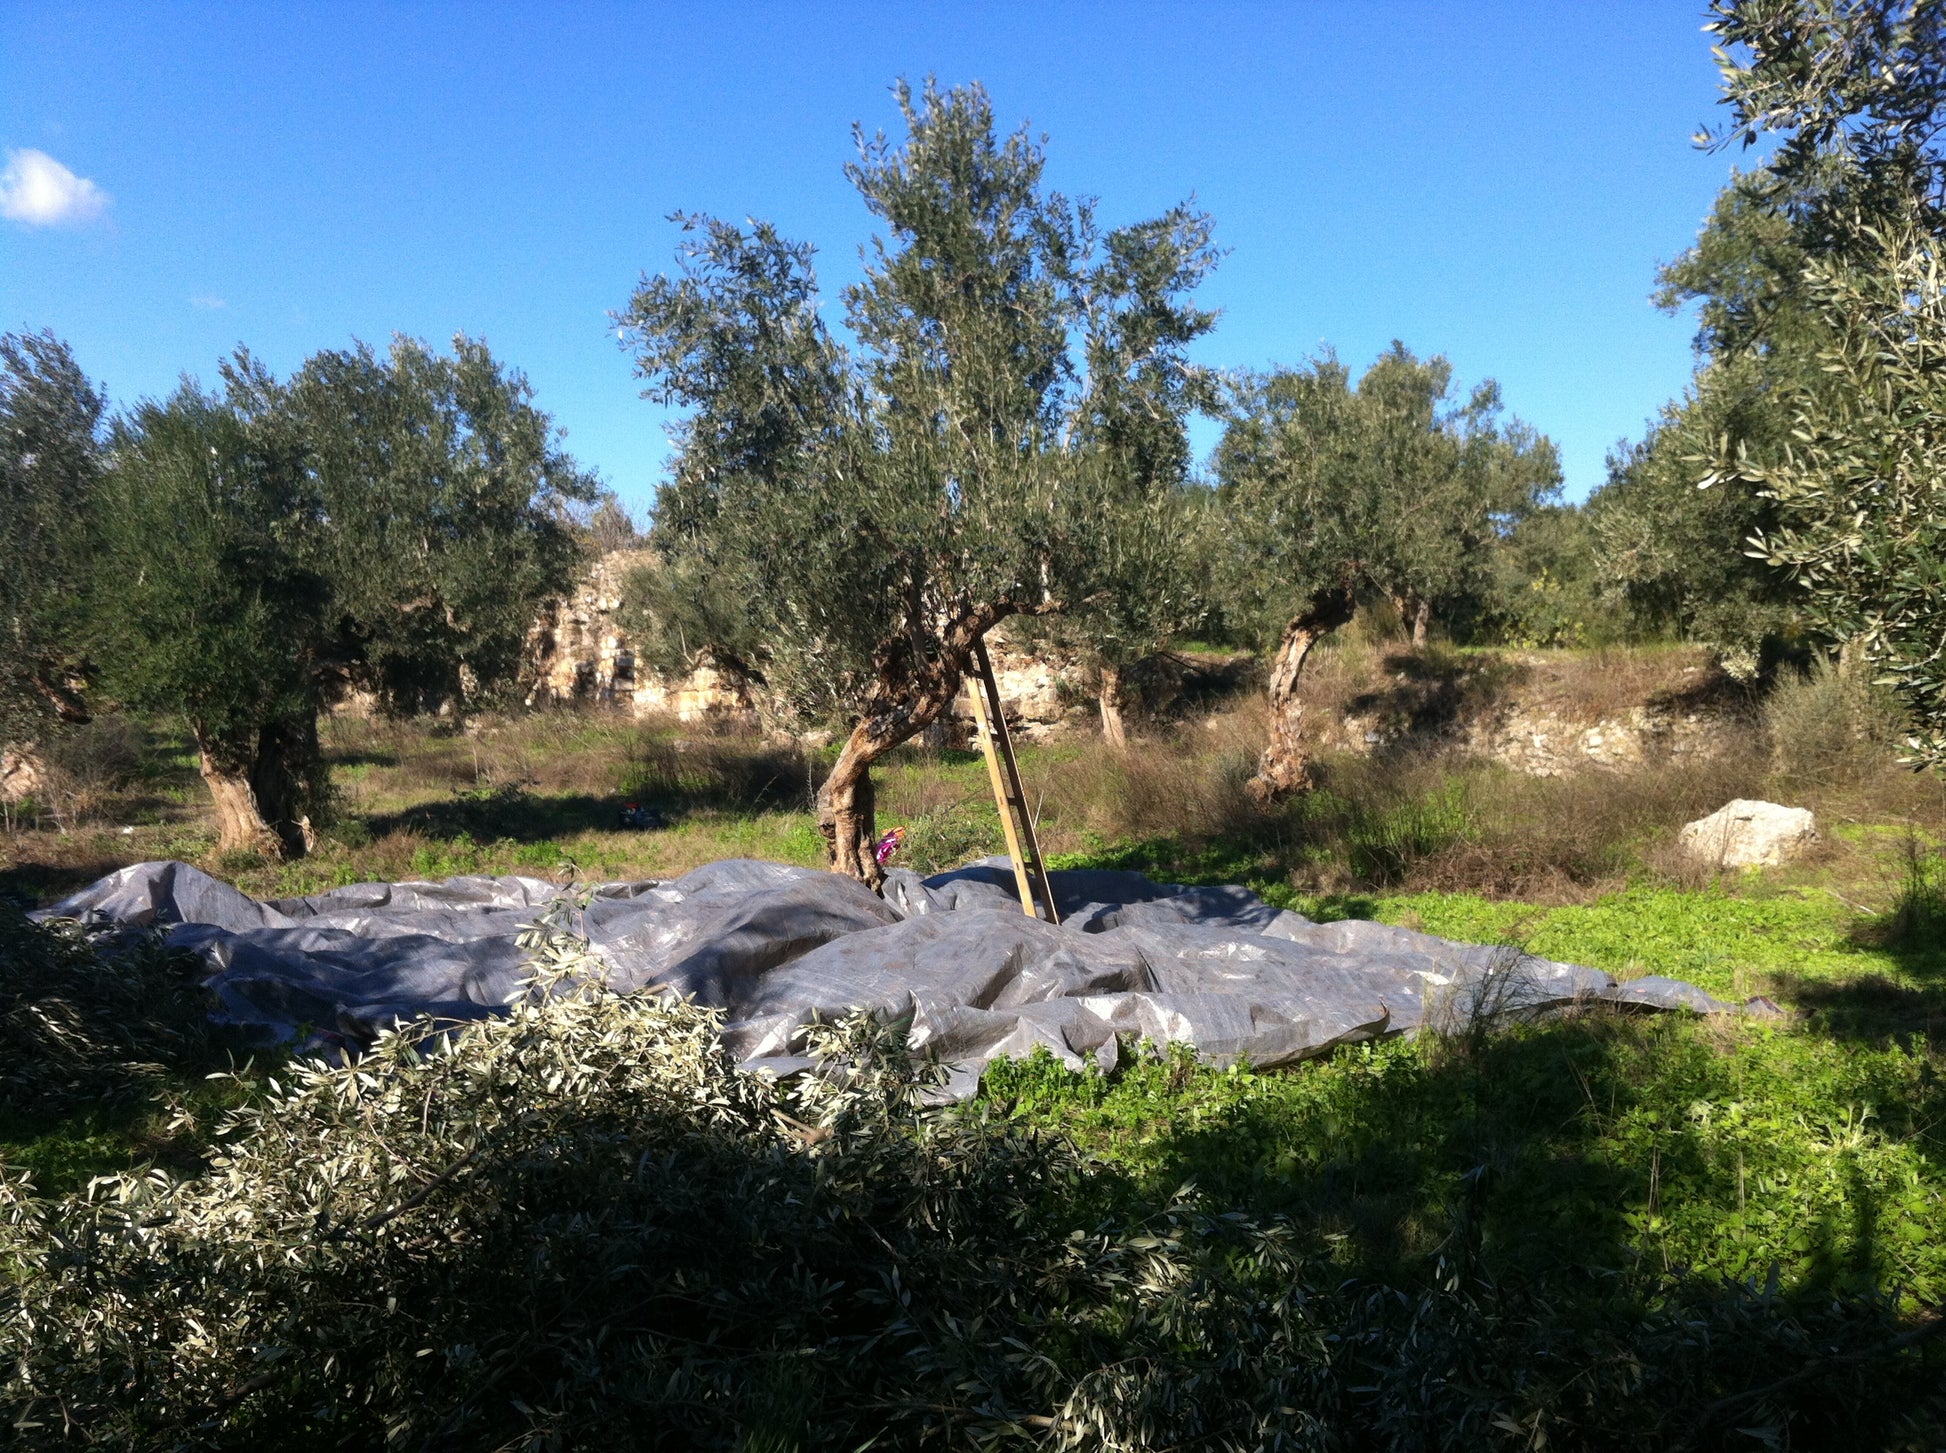 the ancient olive grove from where this twig came from